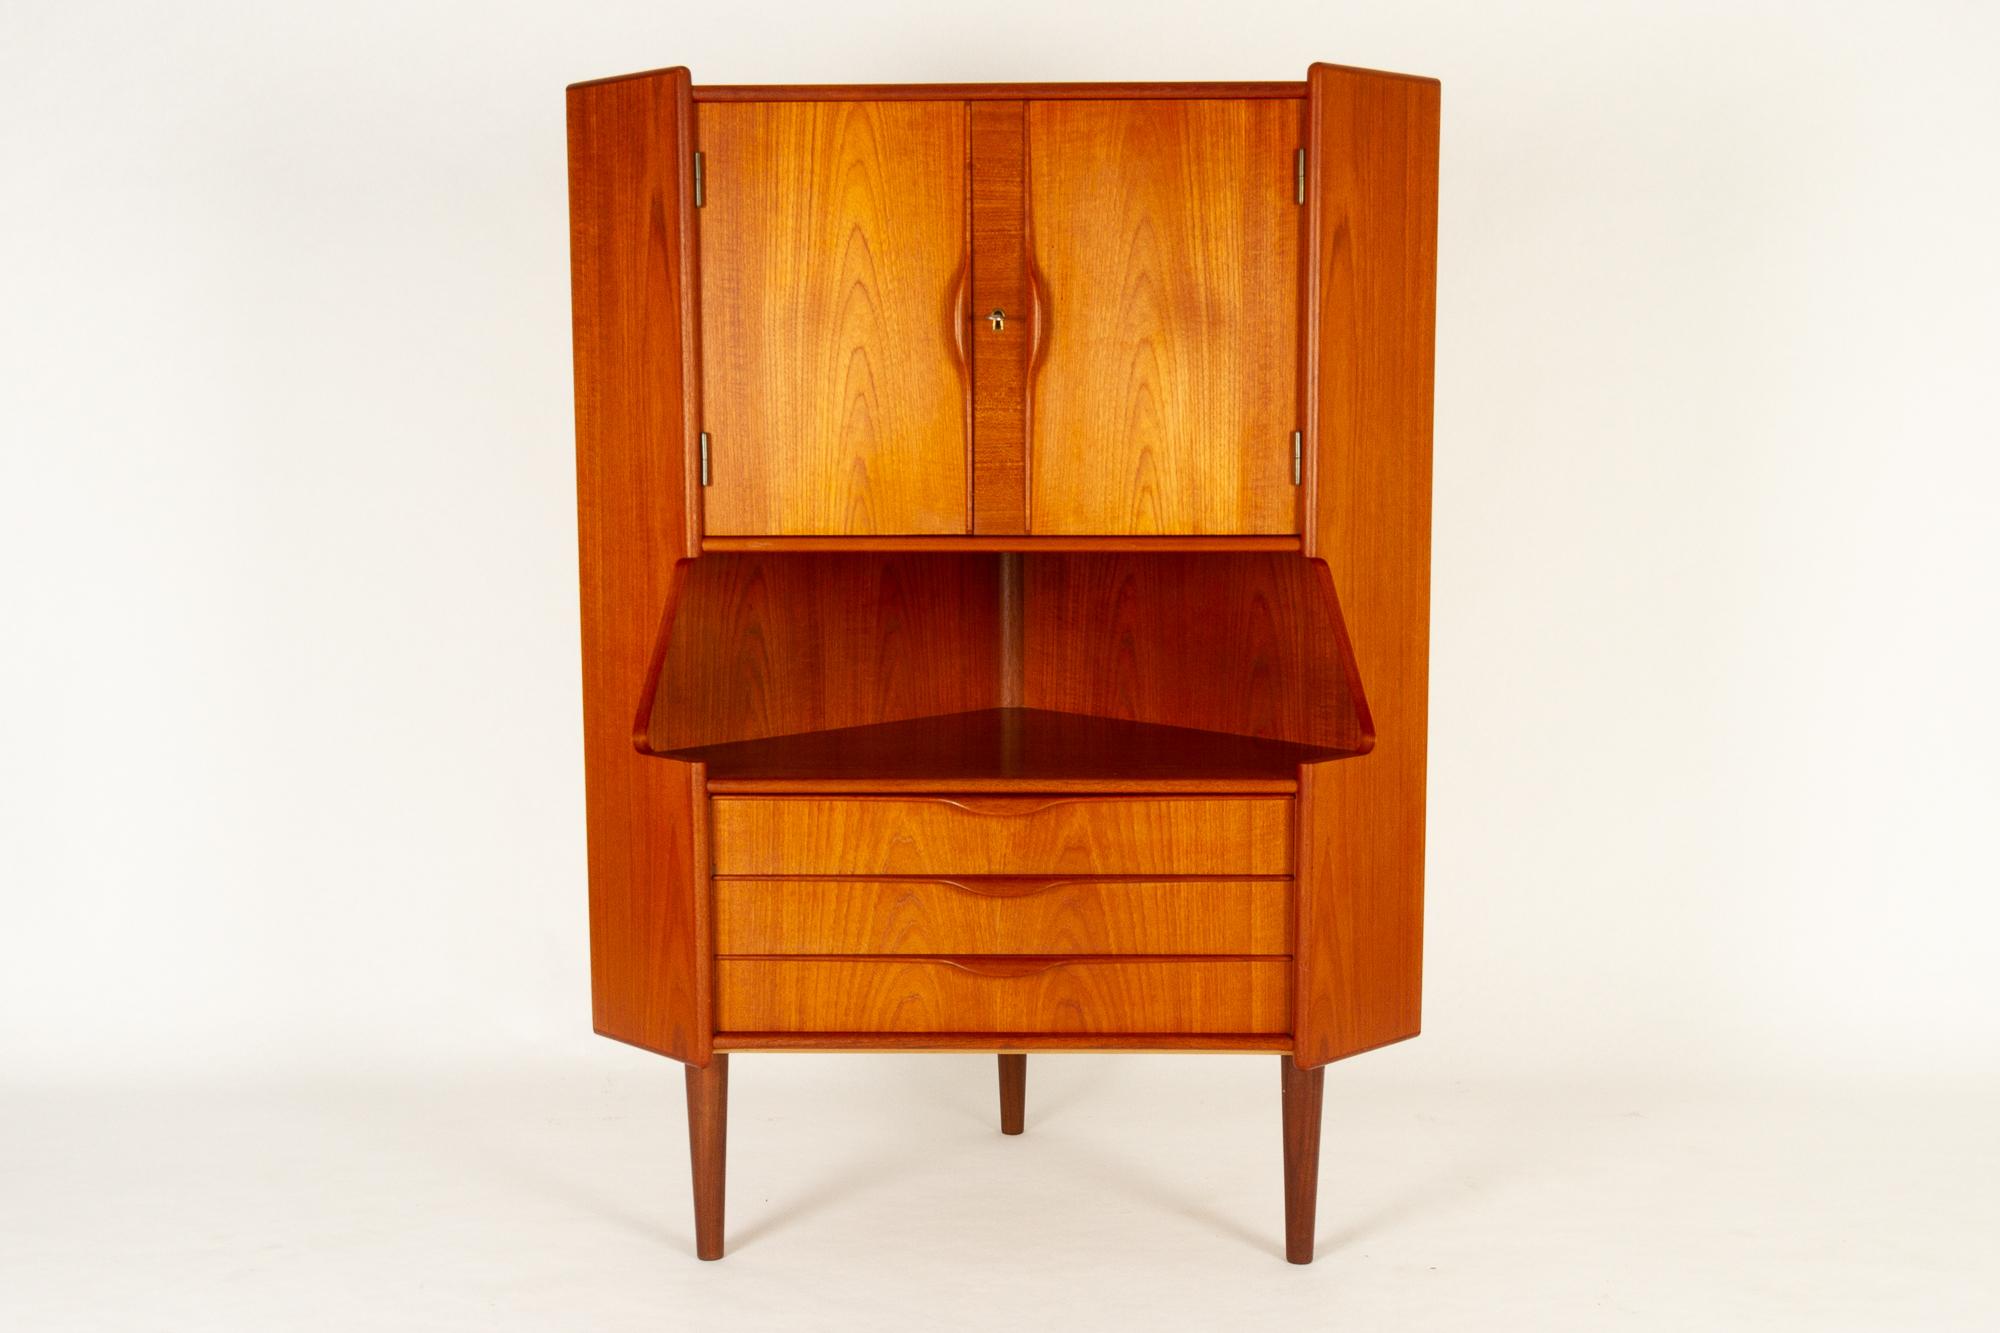 Danish Mid-Century Modern teak corner cabinet with bar unit, 1960s.
Very elegant cabinet with large mirrored bar unit, three wide drawers open shelf. Sculpted grips in solid teak. Double cabinet doors with lock and key. Bar unit has a black curved